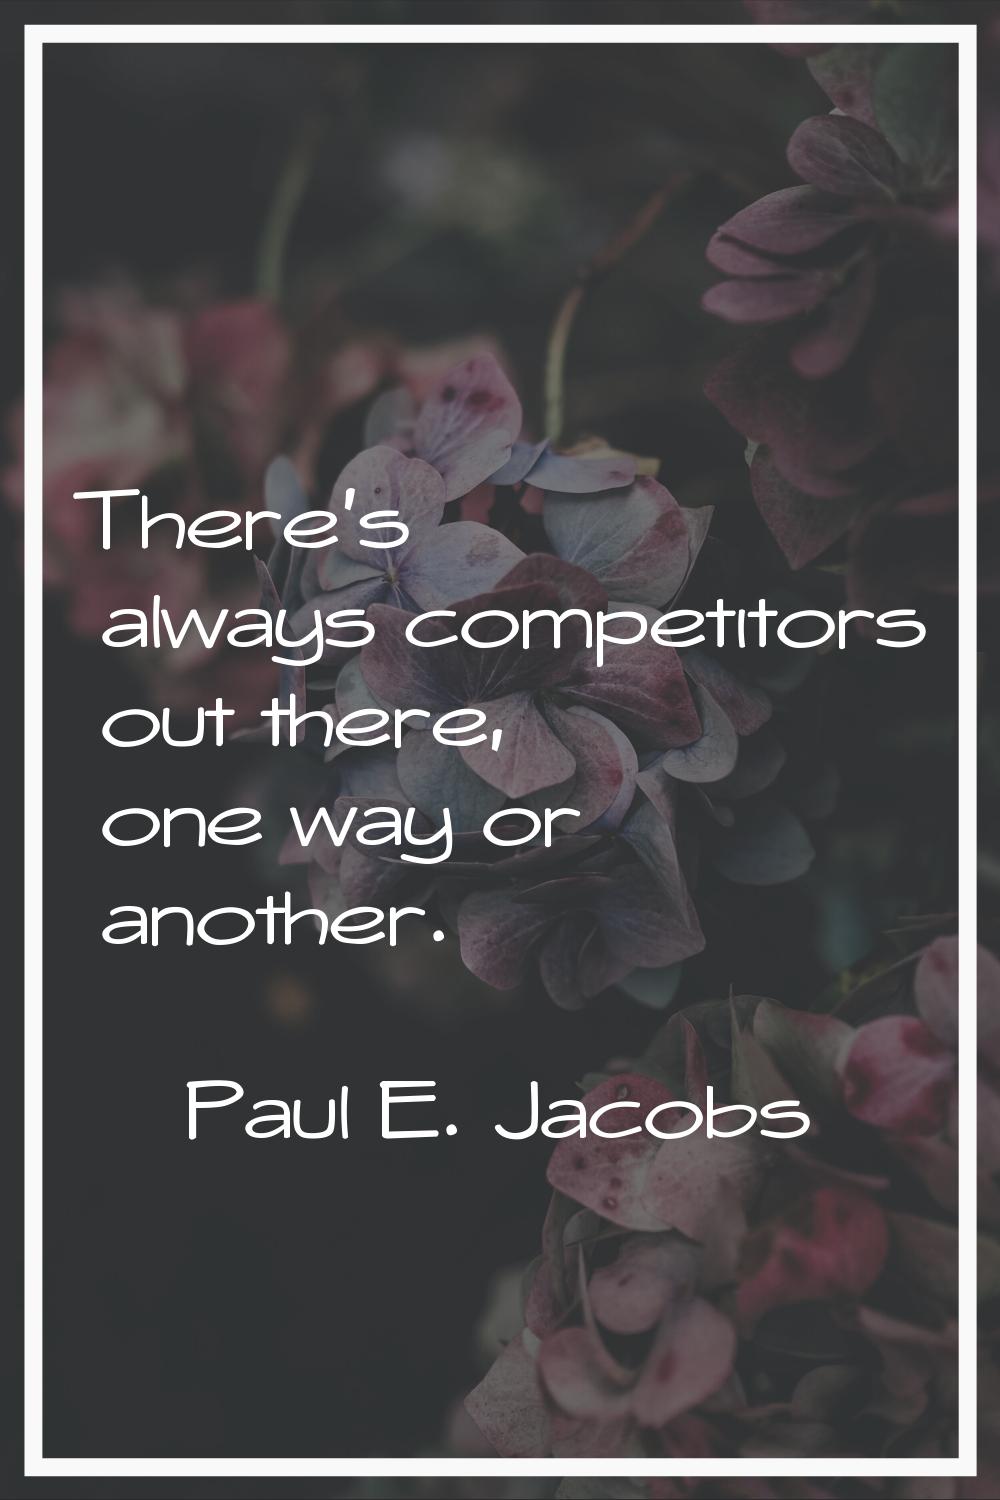 There's always competitors out there, one way or another.